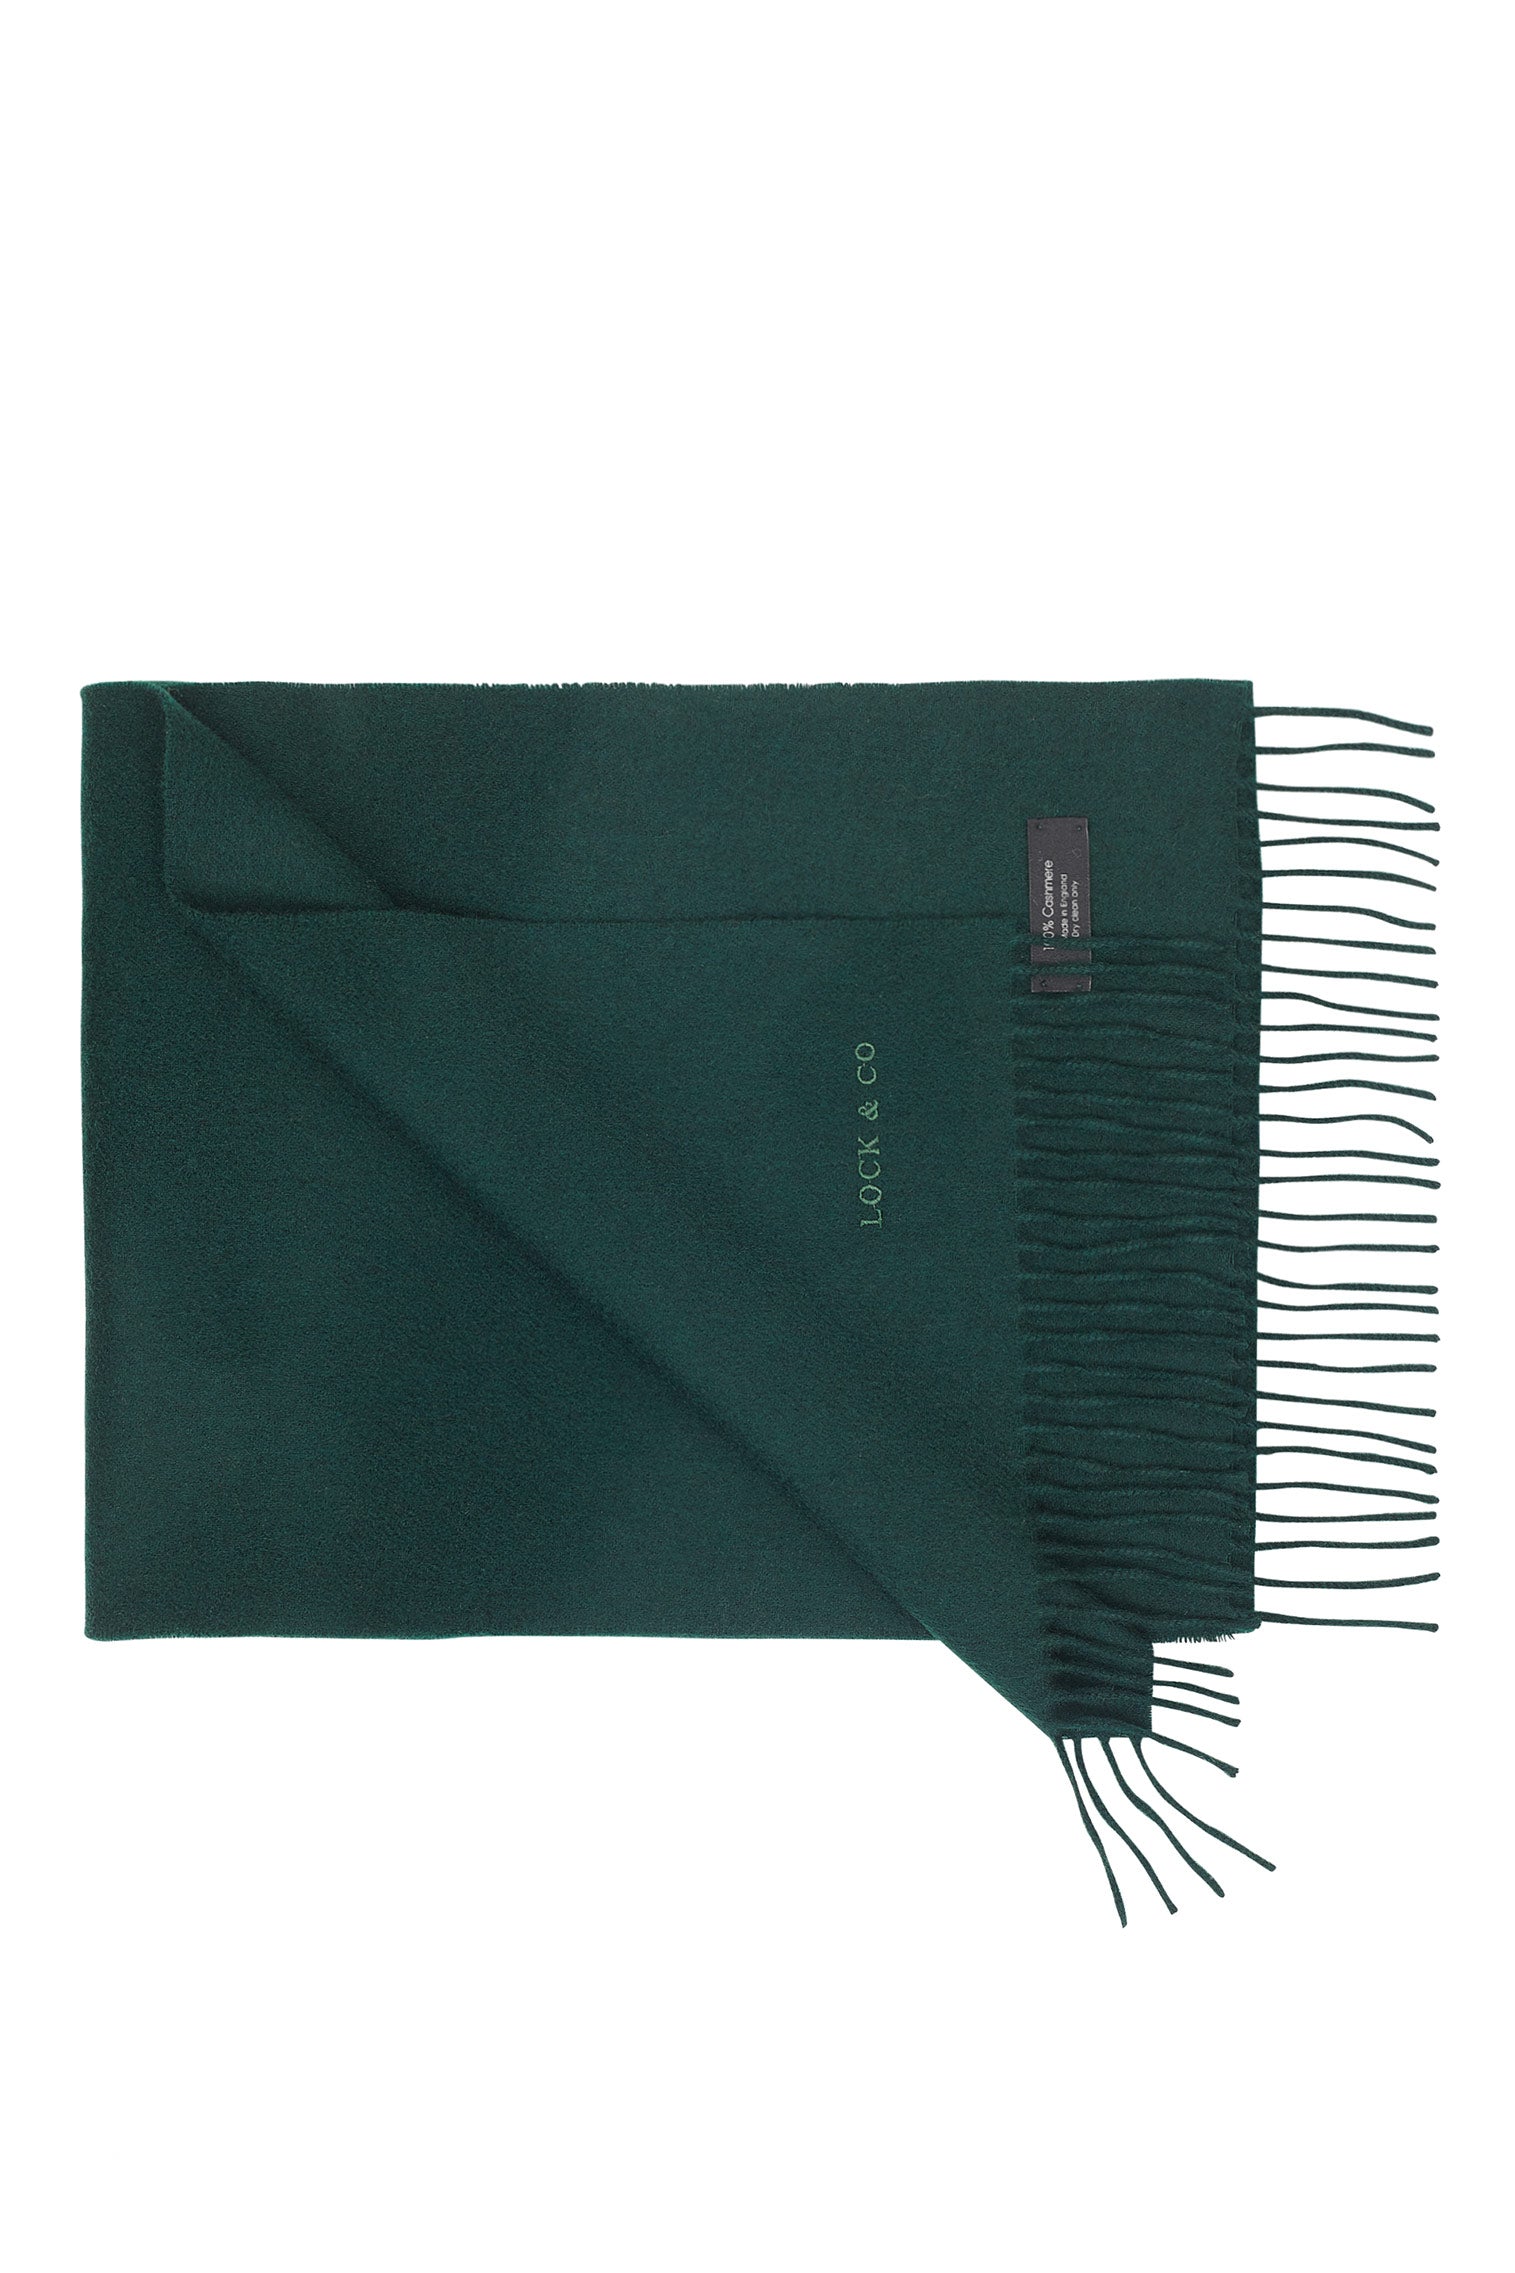 Cashmere Scarf - Mother's Day Gift Guide - Lock & Co. Hatters London UK